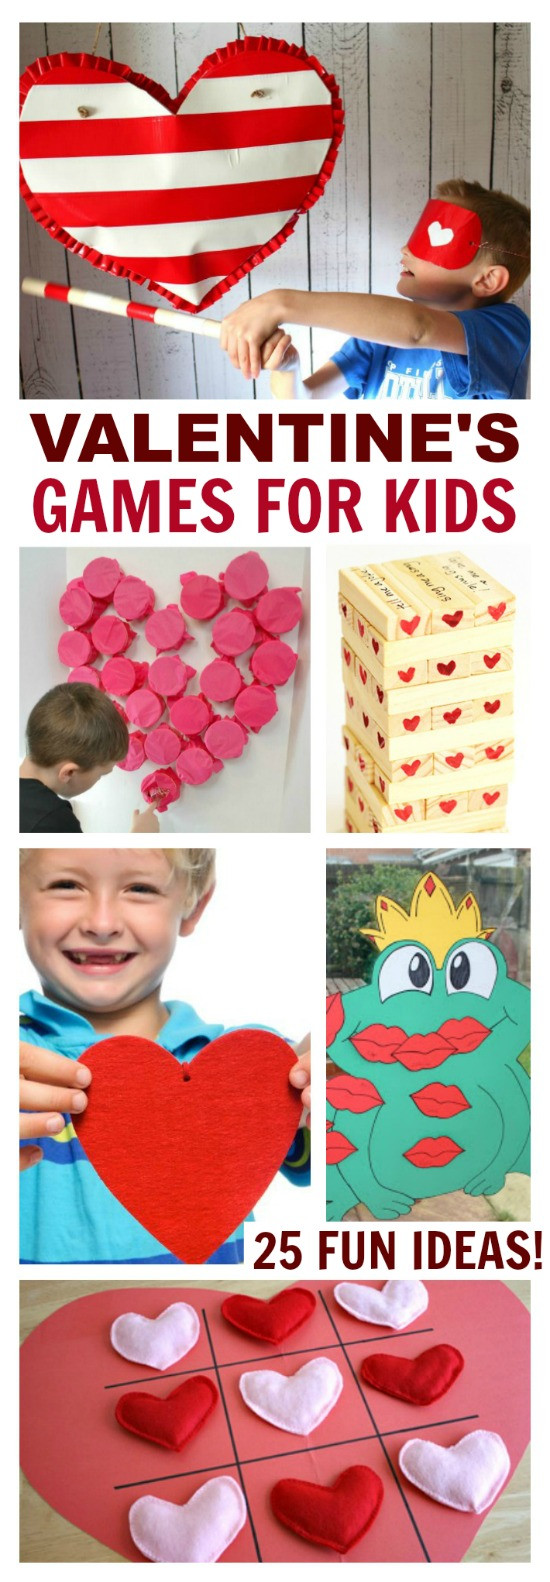 Valentine Party Ideas For Kids
 Valentine s Games for Kids